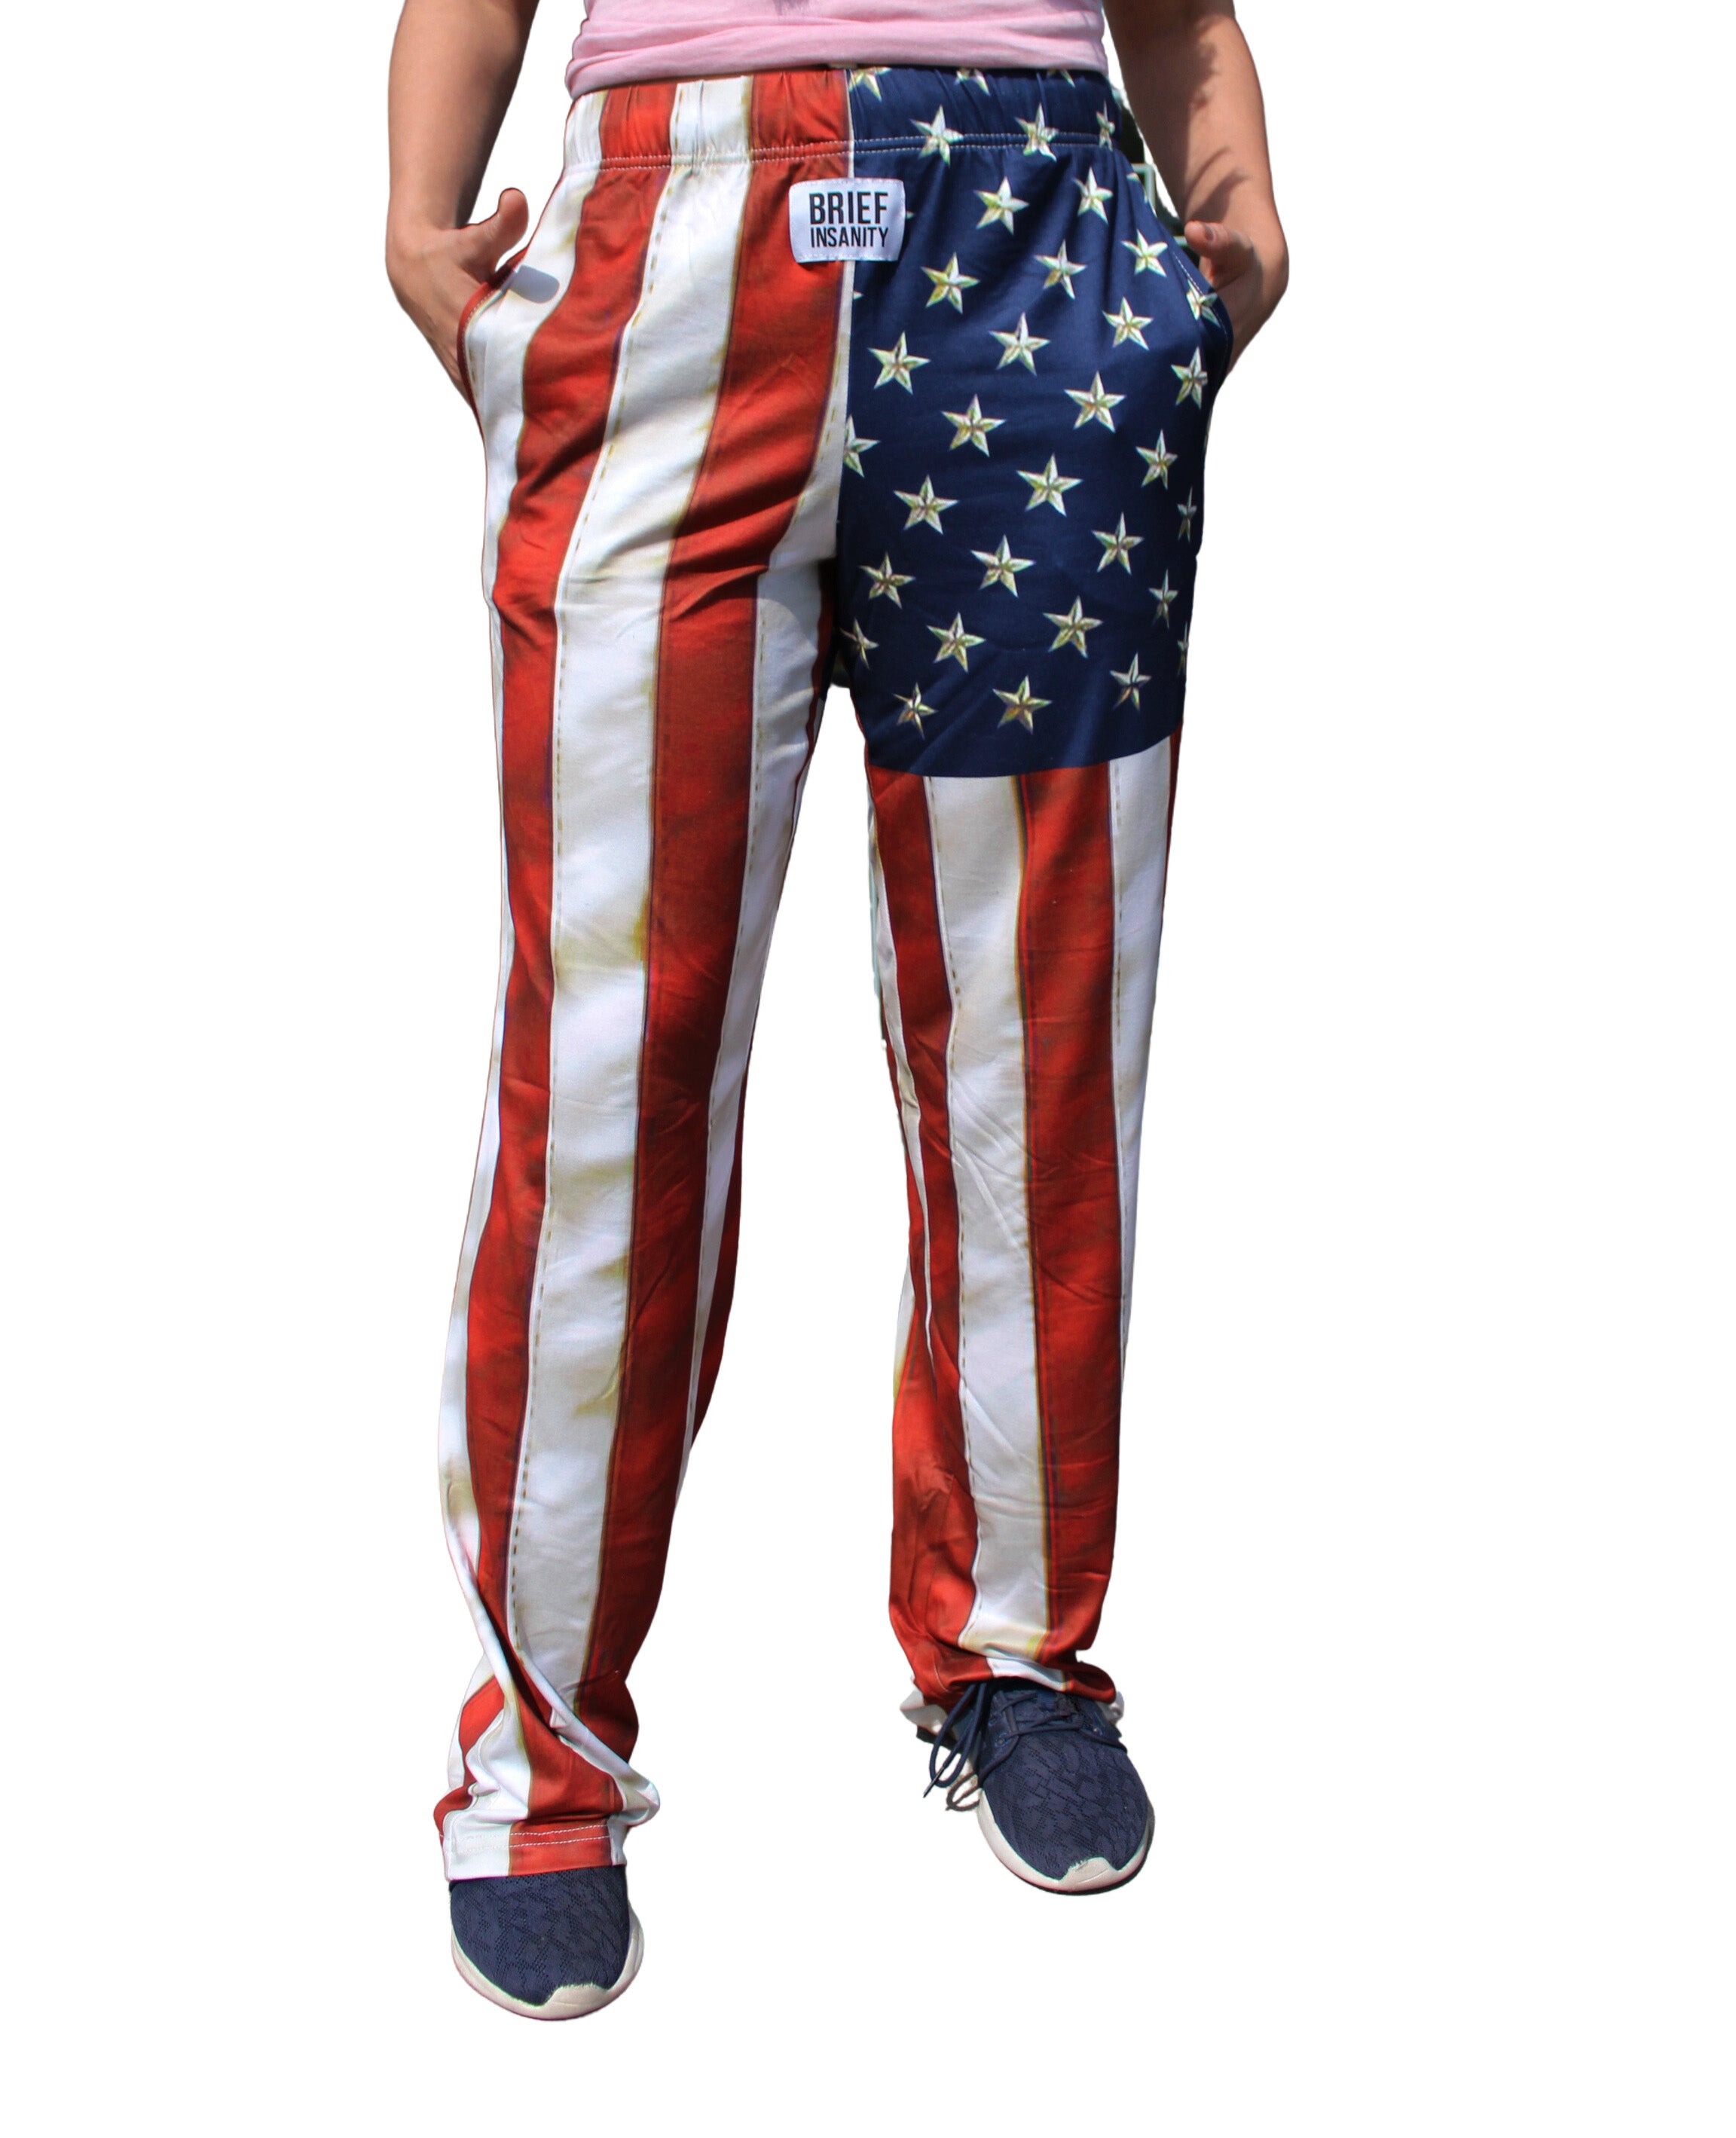 American Flag Pajama Lounge Pants full front view image on model